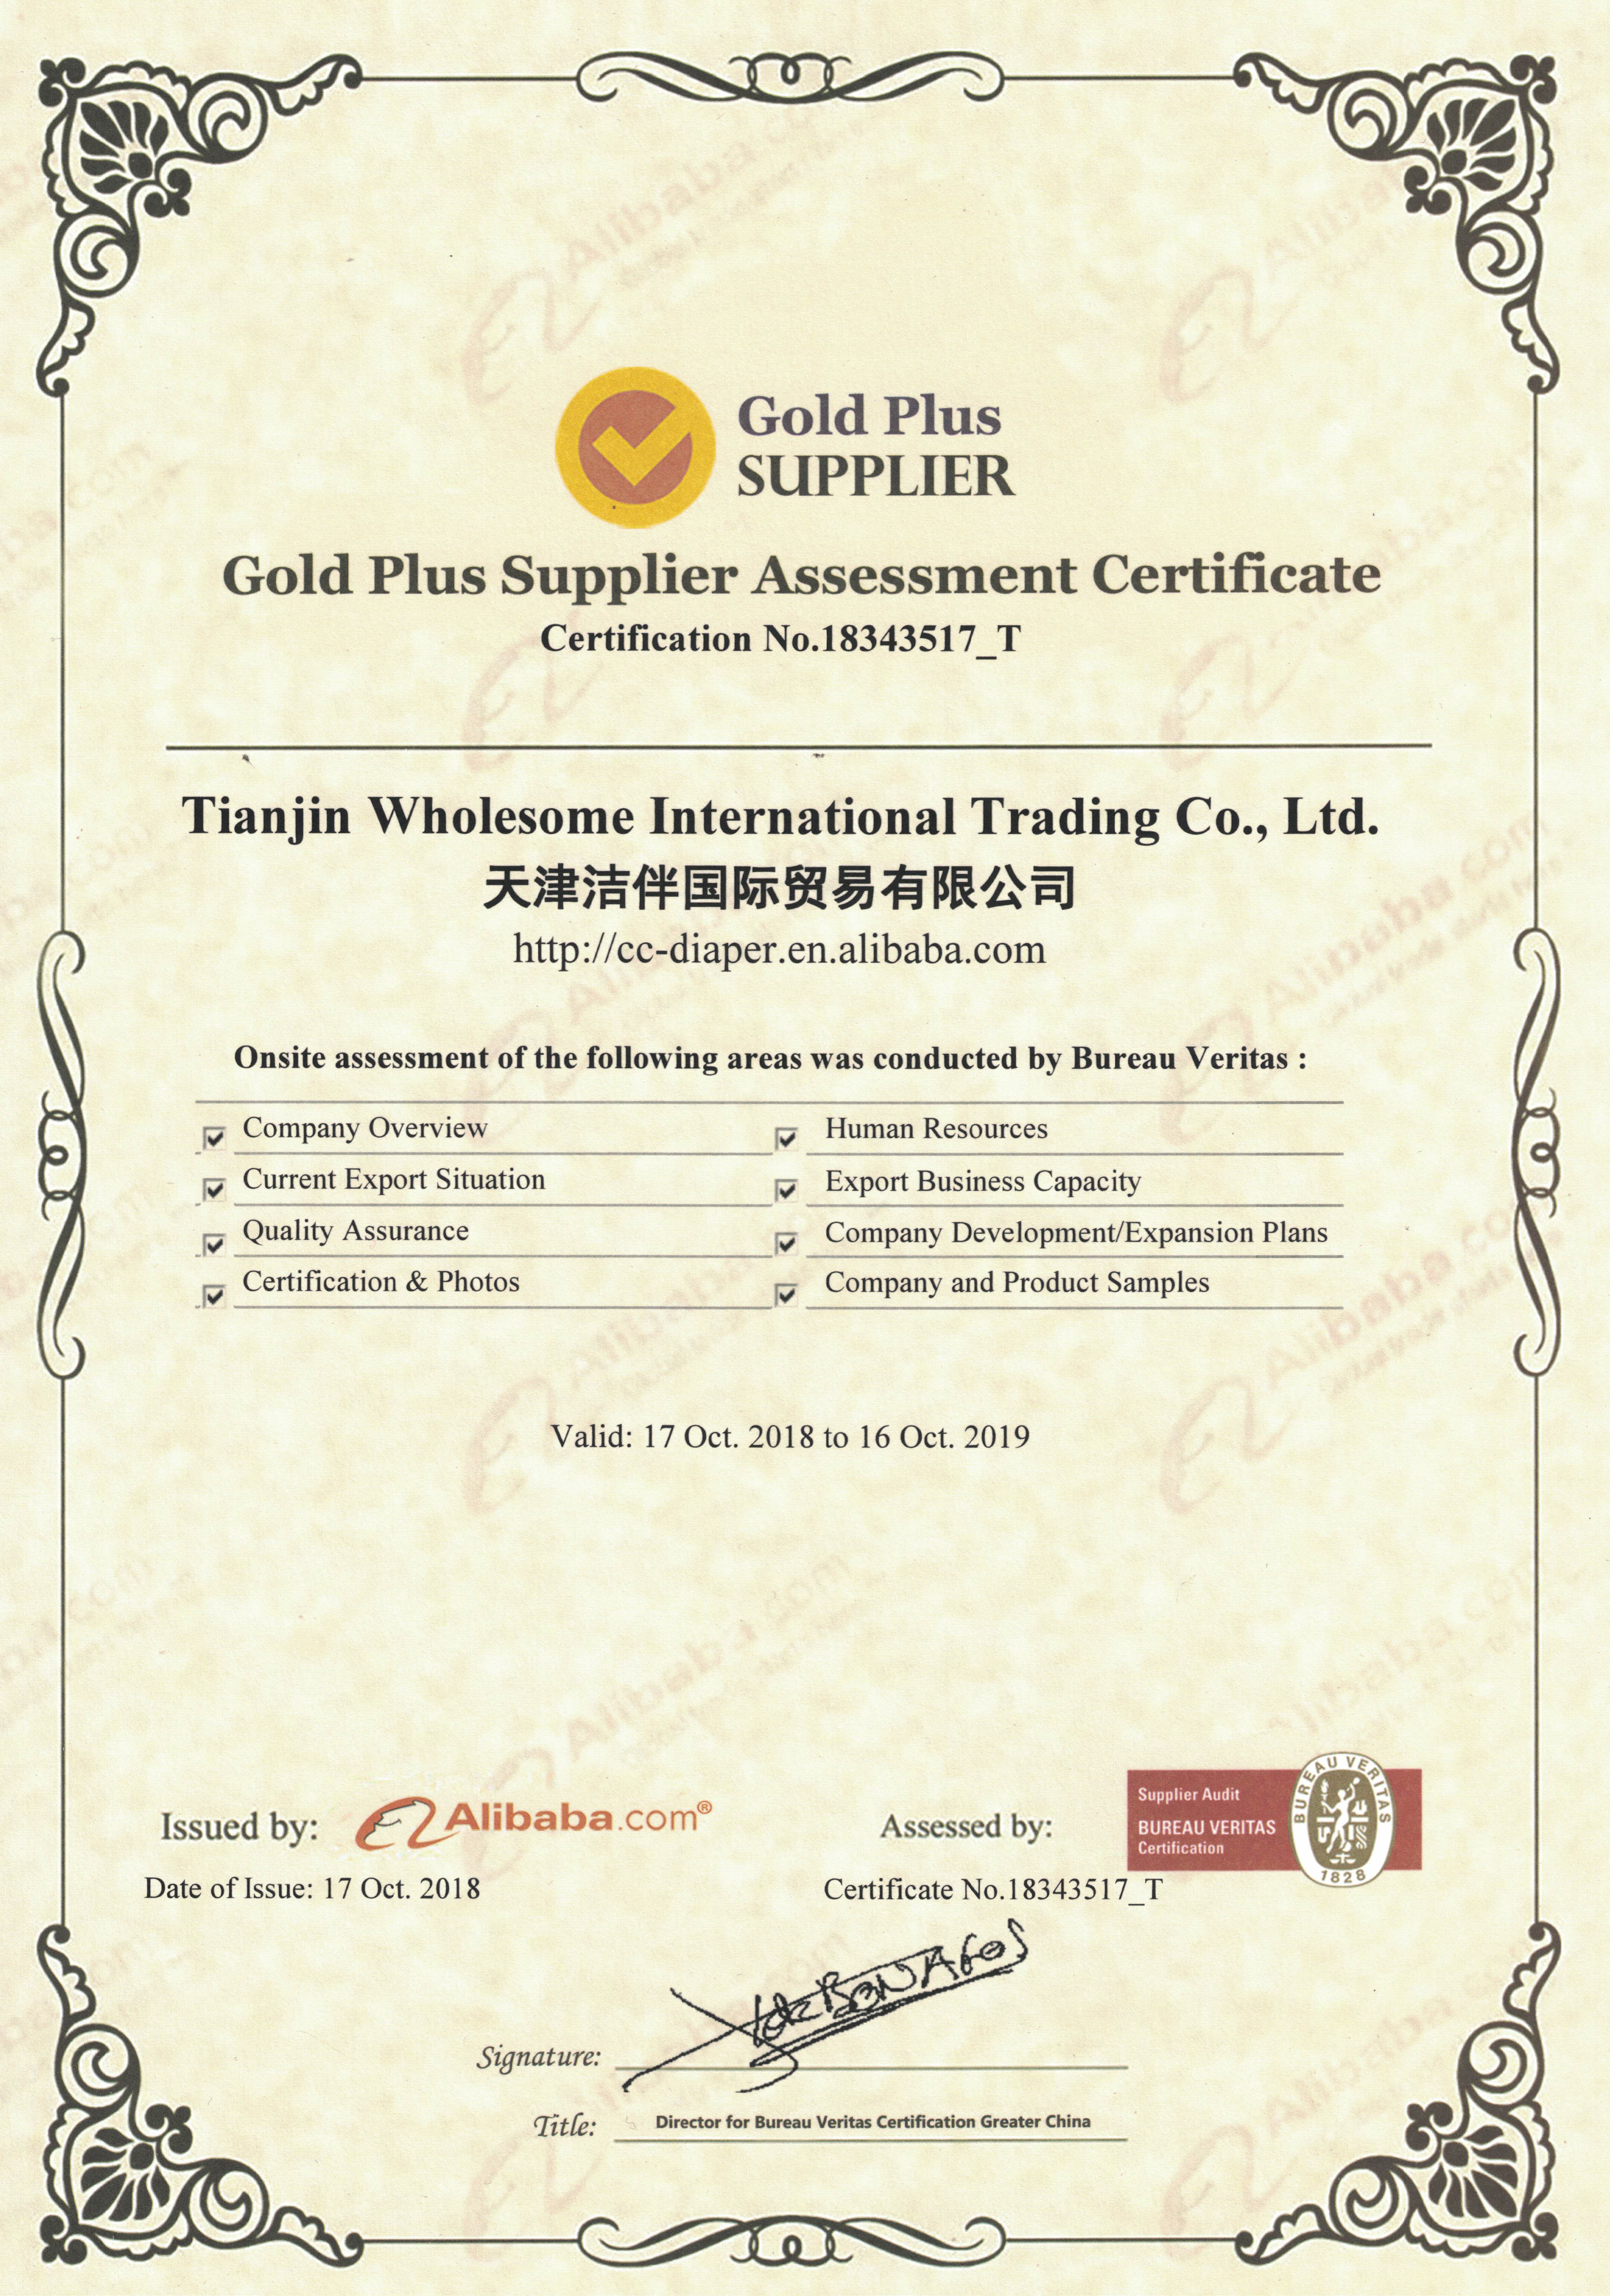 China's quality manufacturers and gold suppliers